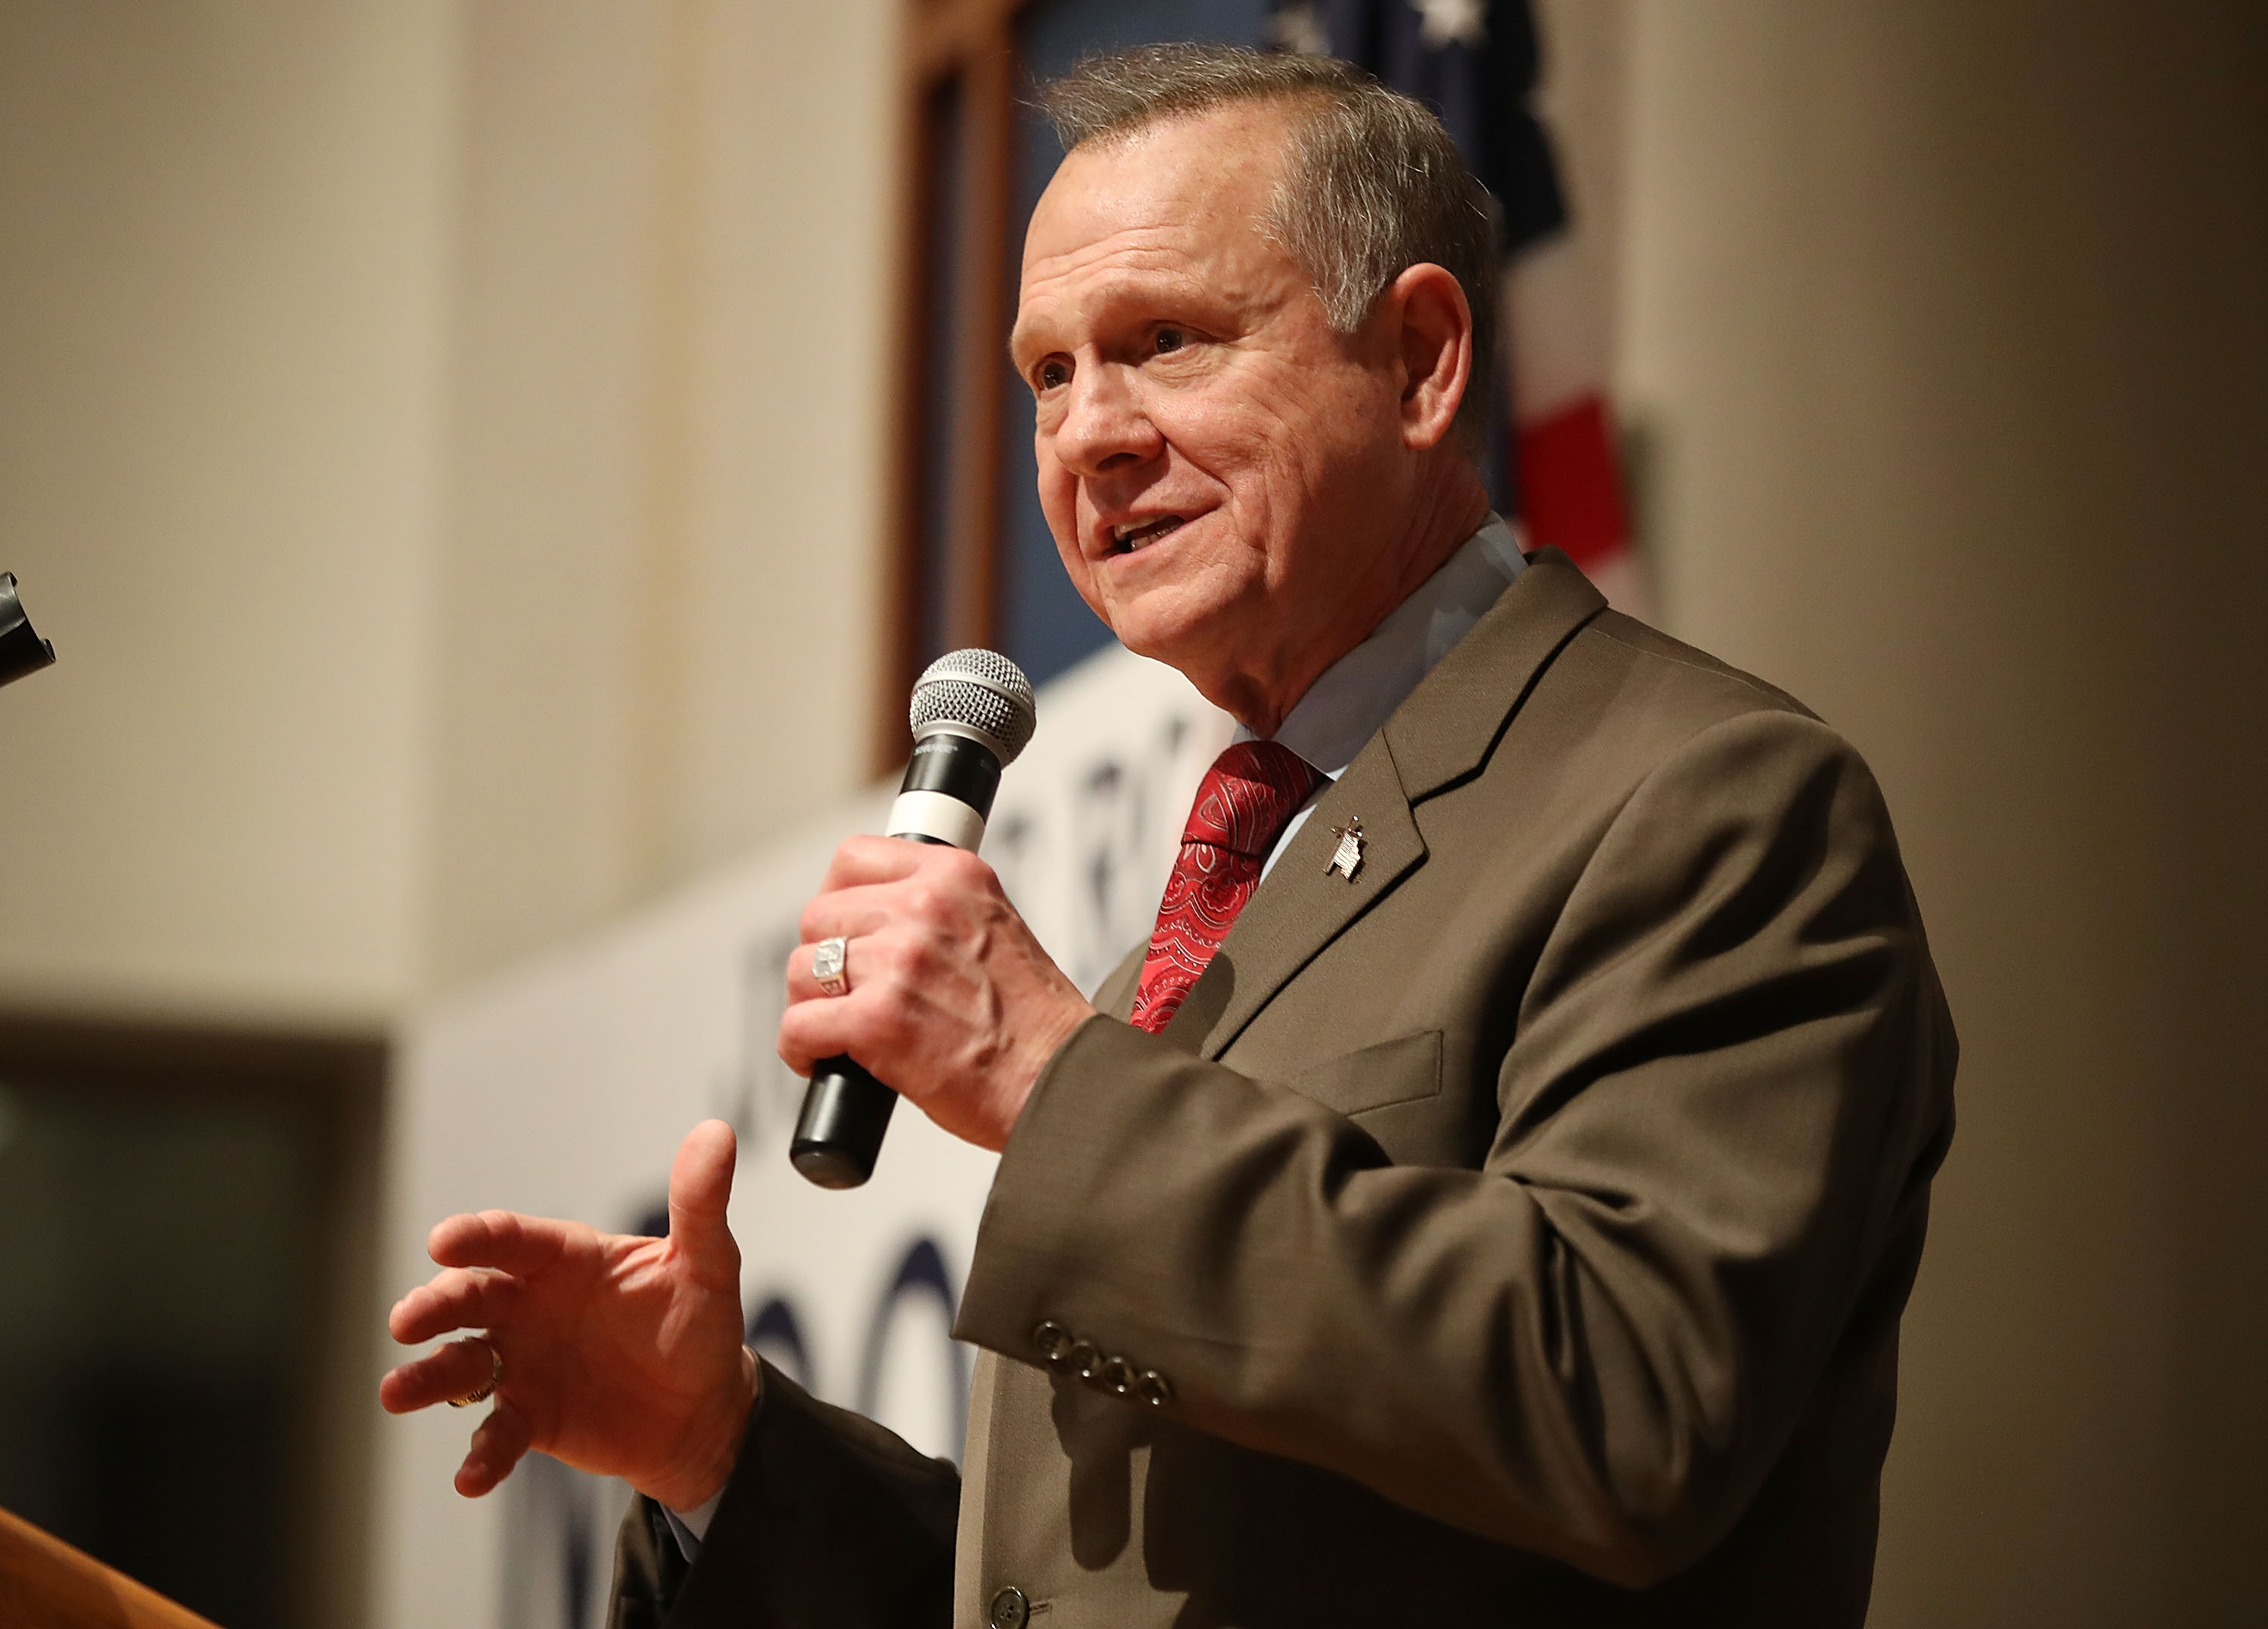 Republican Senatorial candidate Roy Moore speaks about the race against his Democratic opponent Doug Jones is too close and there will be a recount during his election night party in the RSA Activity Center on December 12, 2017 in Montgomery, Alabama. (Joe Raedle&mdash;Getty Images)